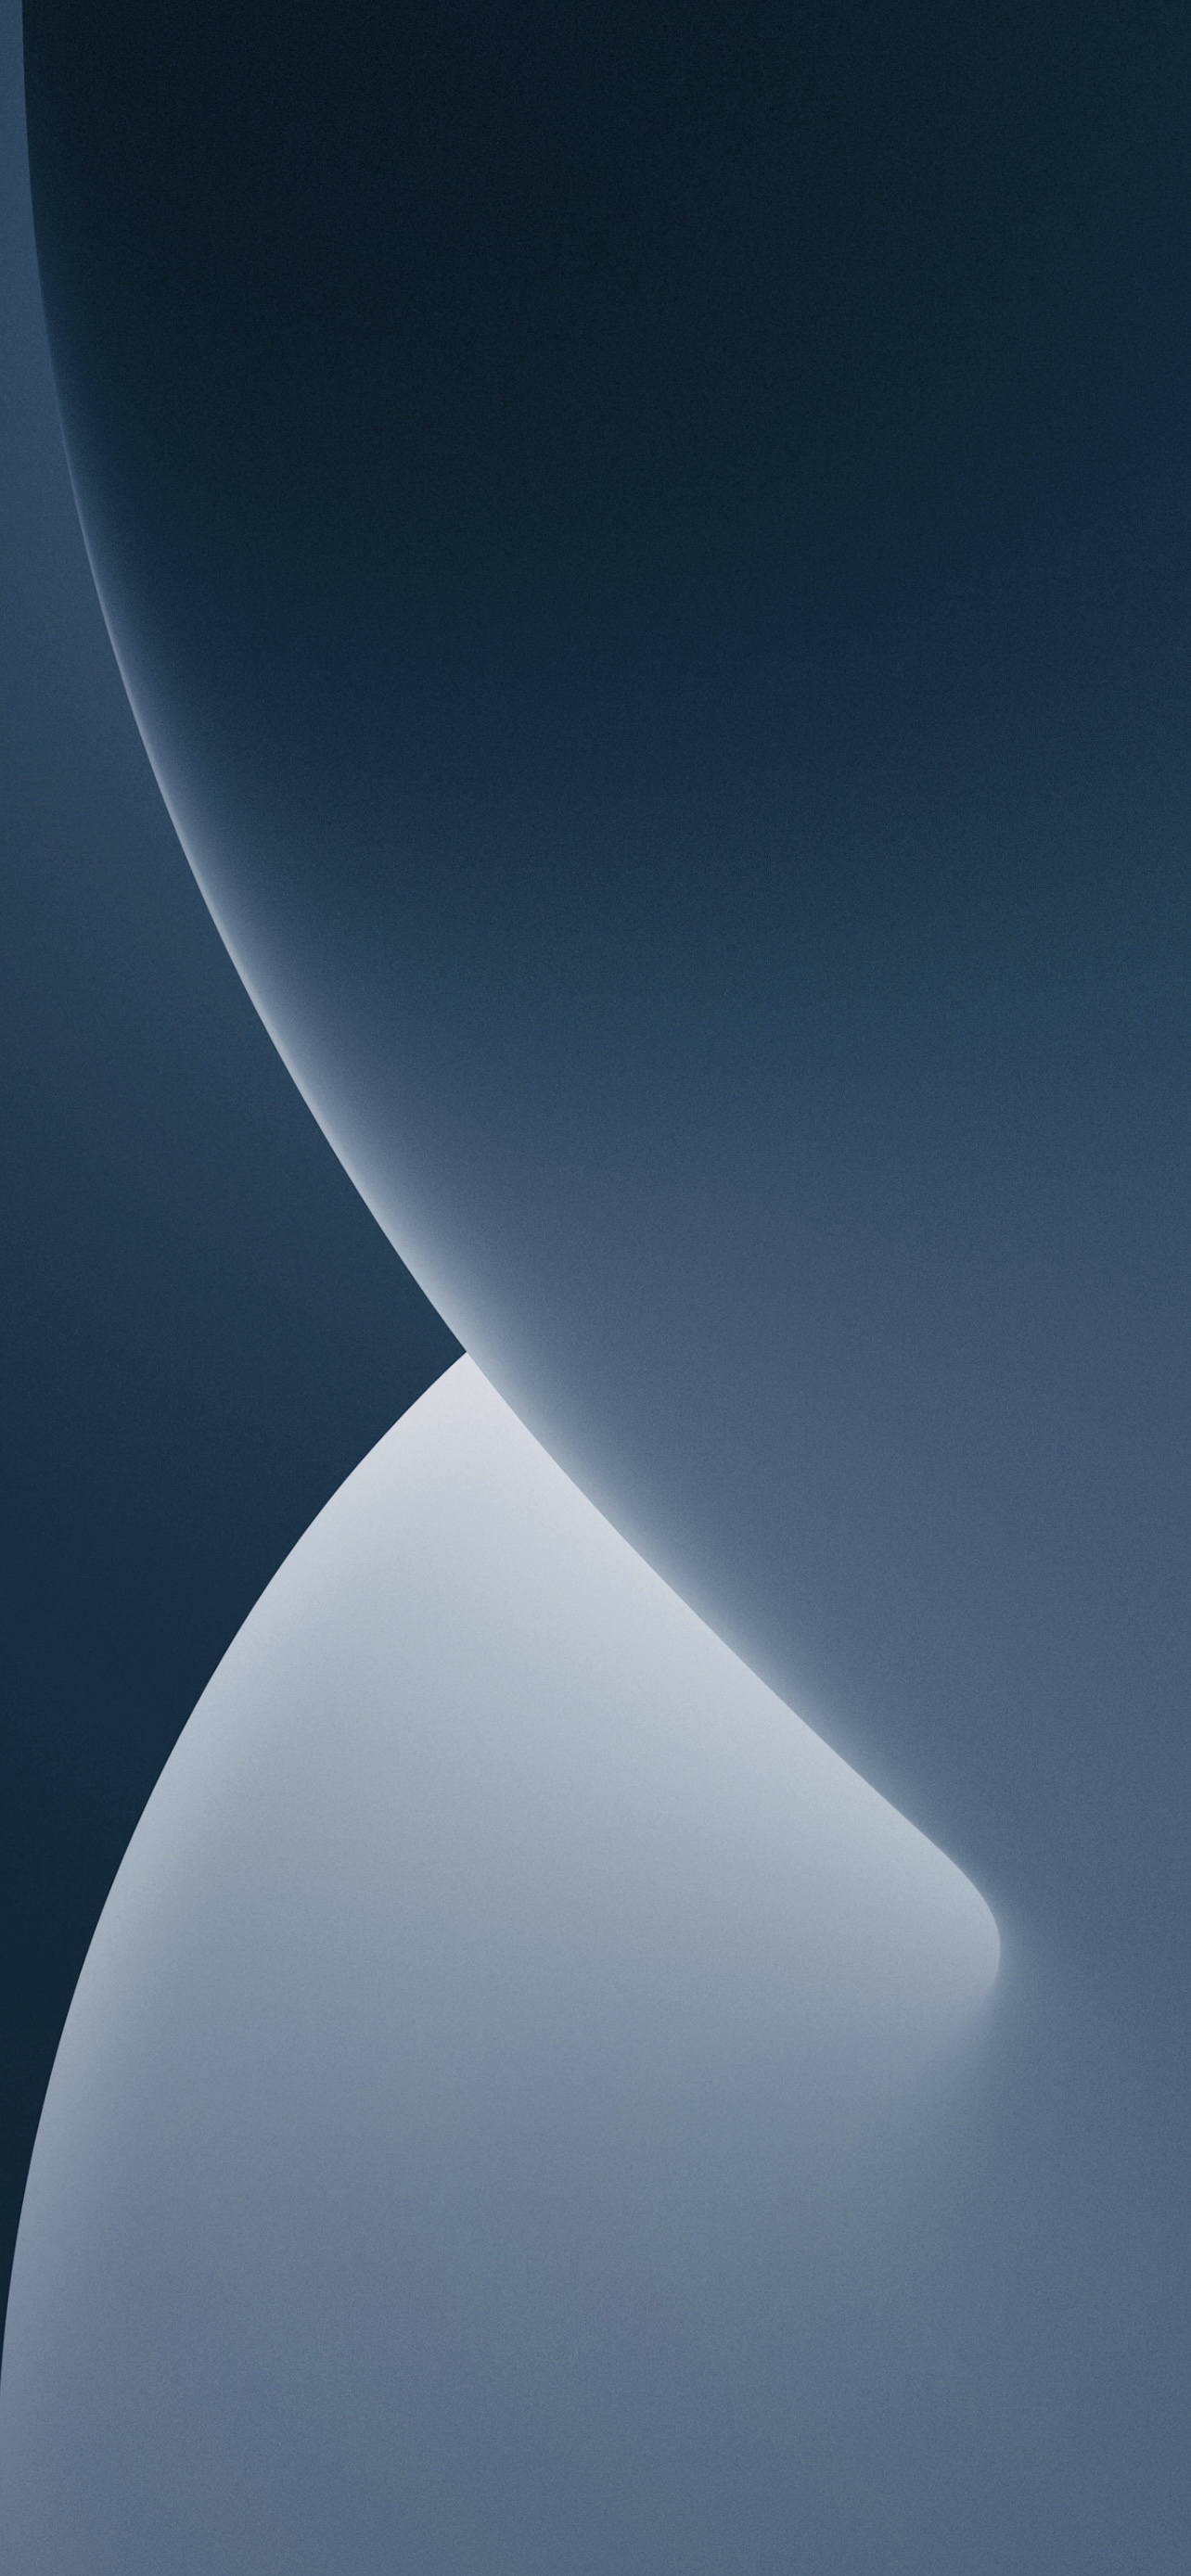 AR7 on Twitter wallpapers iOS15 Sierra Blue Edition Dark Modd  wallpaper for iPhone13ProMax iPhone13Pro iPhone13 iPhone13Mini  iPhone12ProMax iPhone12Pro iPhone12 iPhone12Mini other iPhone iPad   httpstco7epl6h36aq Exclusive Modd 